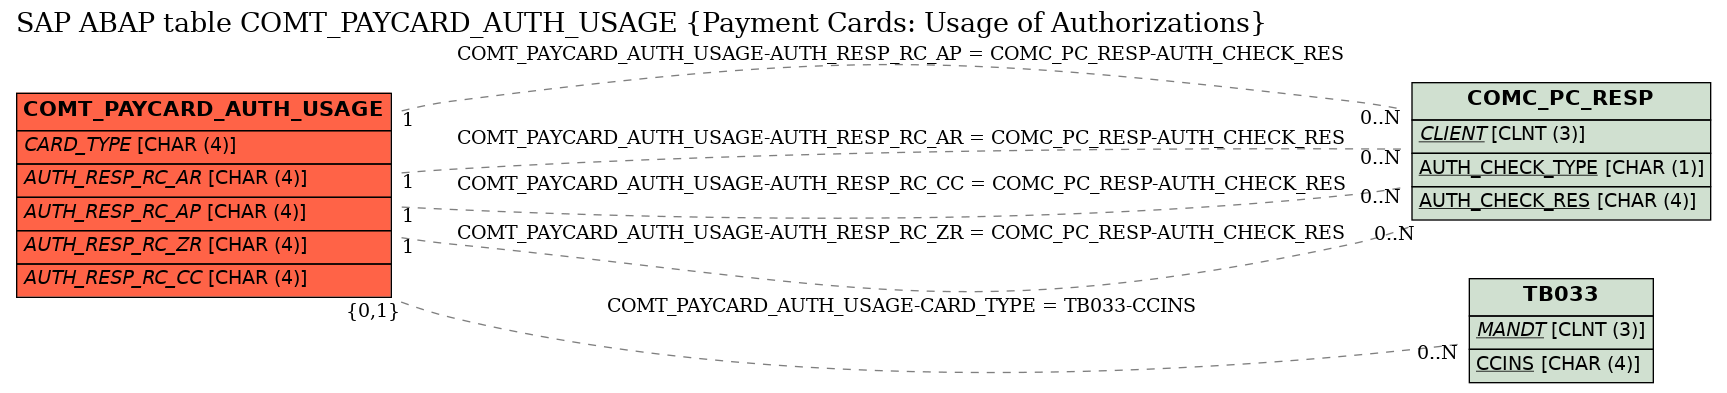 E-R Diagram for table COMT_PAYCARD_AUTH_USAGE (Payment Cards: Usage of Authorizations)